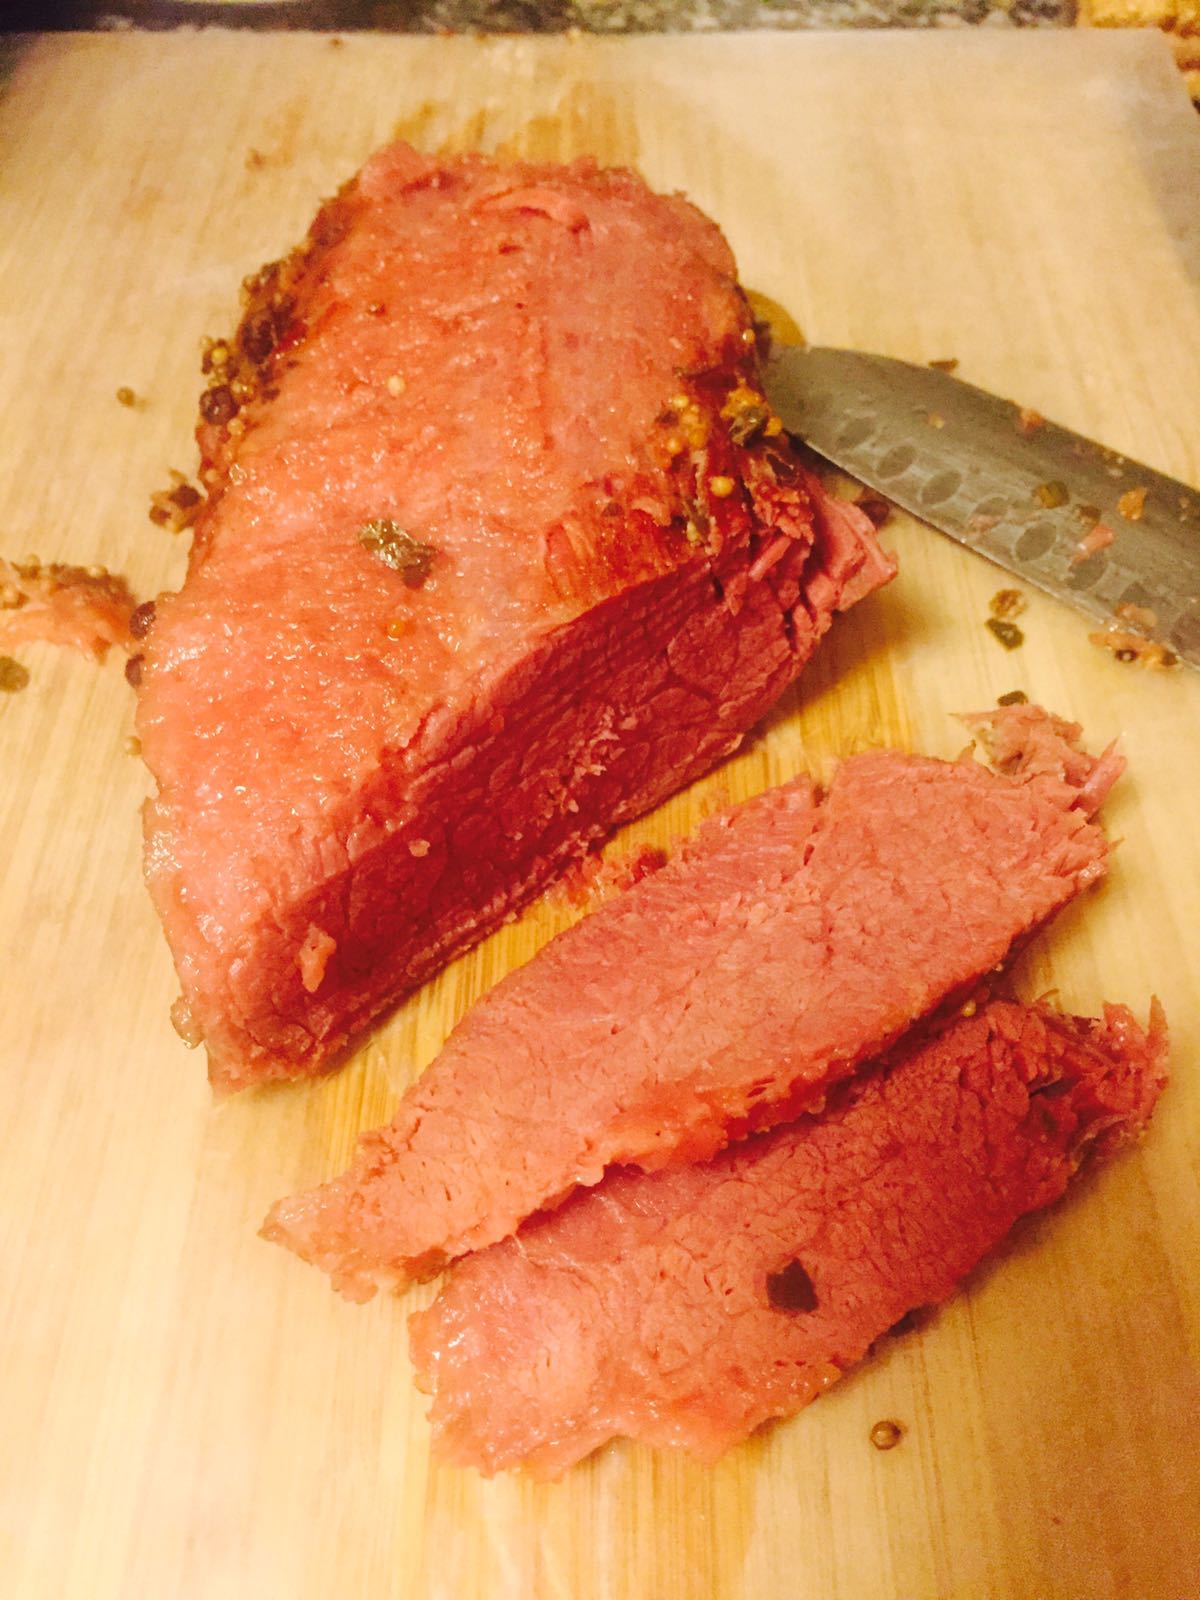 Fragrant Baked Corned Beef Brisket (Point Cut) - Cook in city - Enjoy the cooking action!